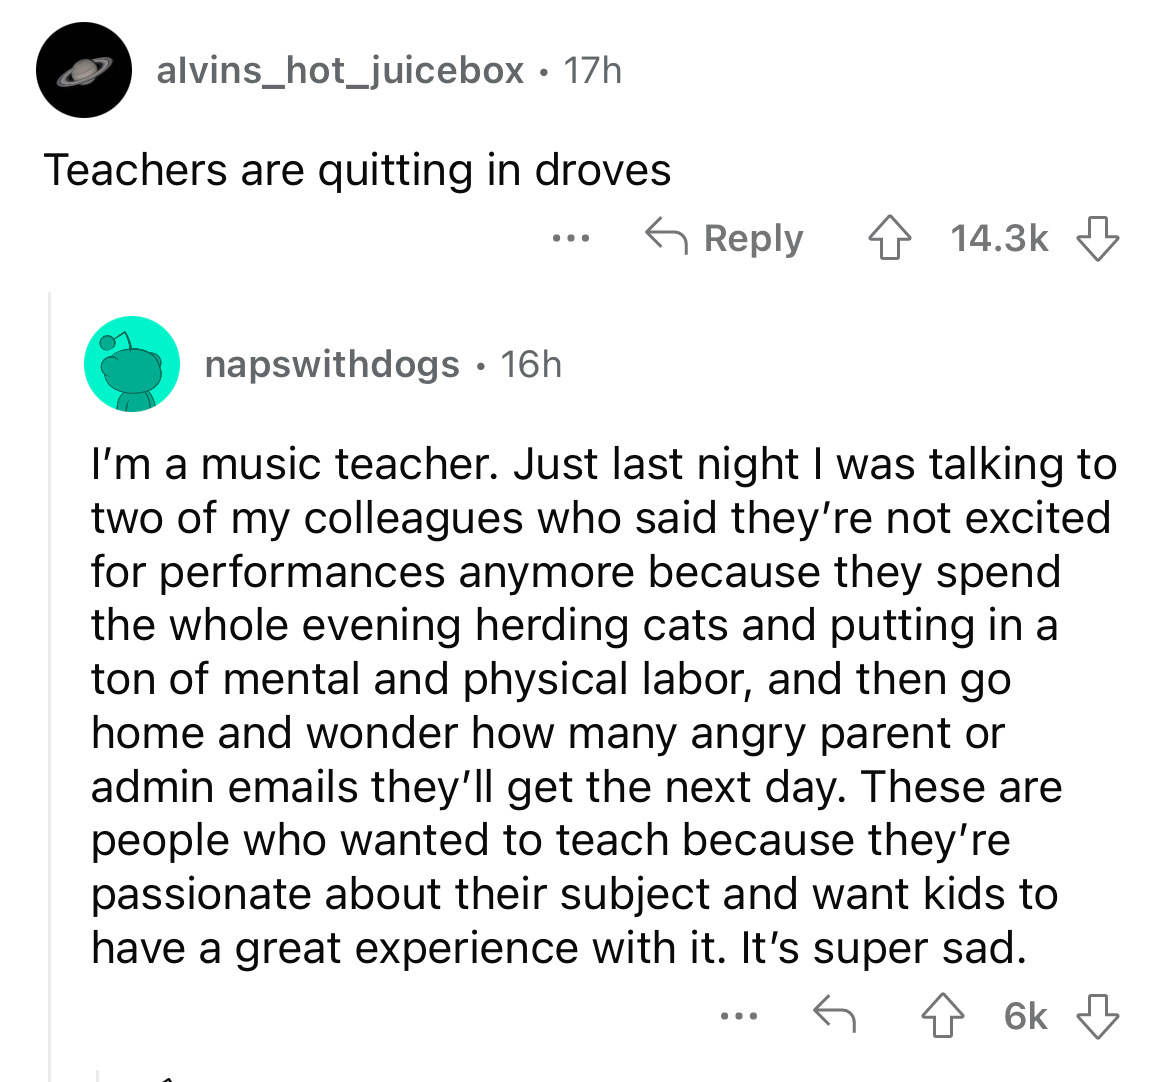 angle - alvins_hot_juicebox. 17h Teachers are quitting in droves ... napswithdogs. 16h I'm a music teacher. Just last night I was talking to two of my colleagues who said they're not excited for performances anymore because they spend the whole evening he